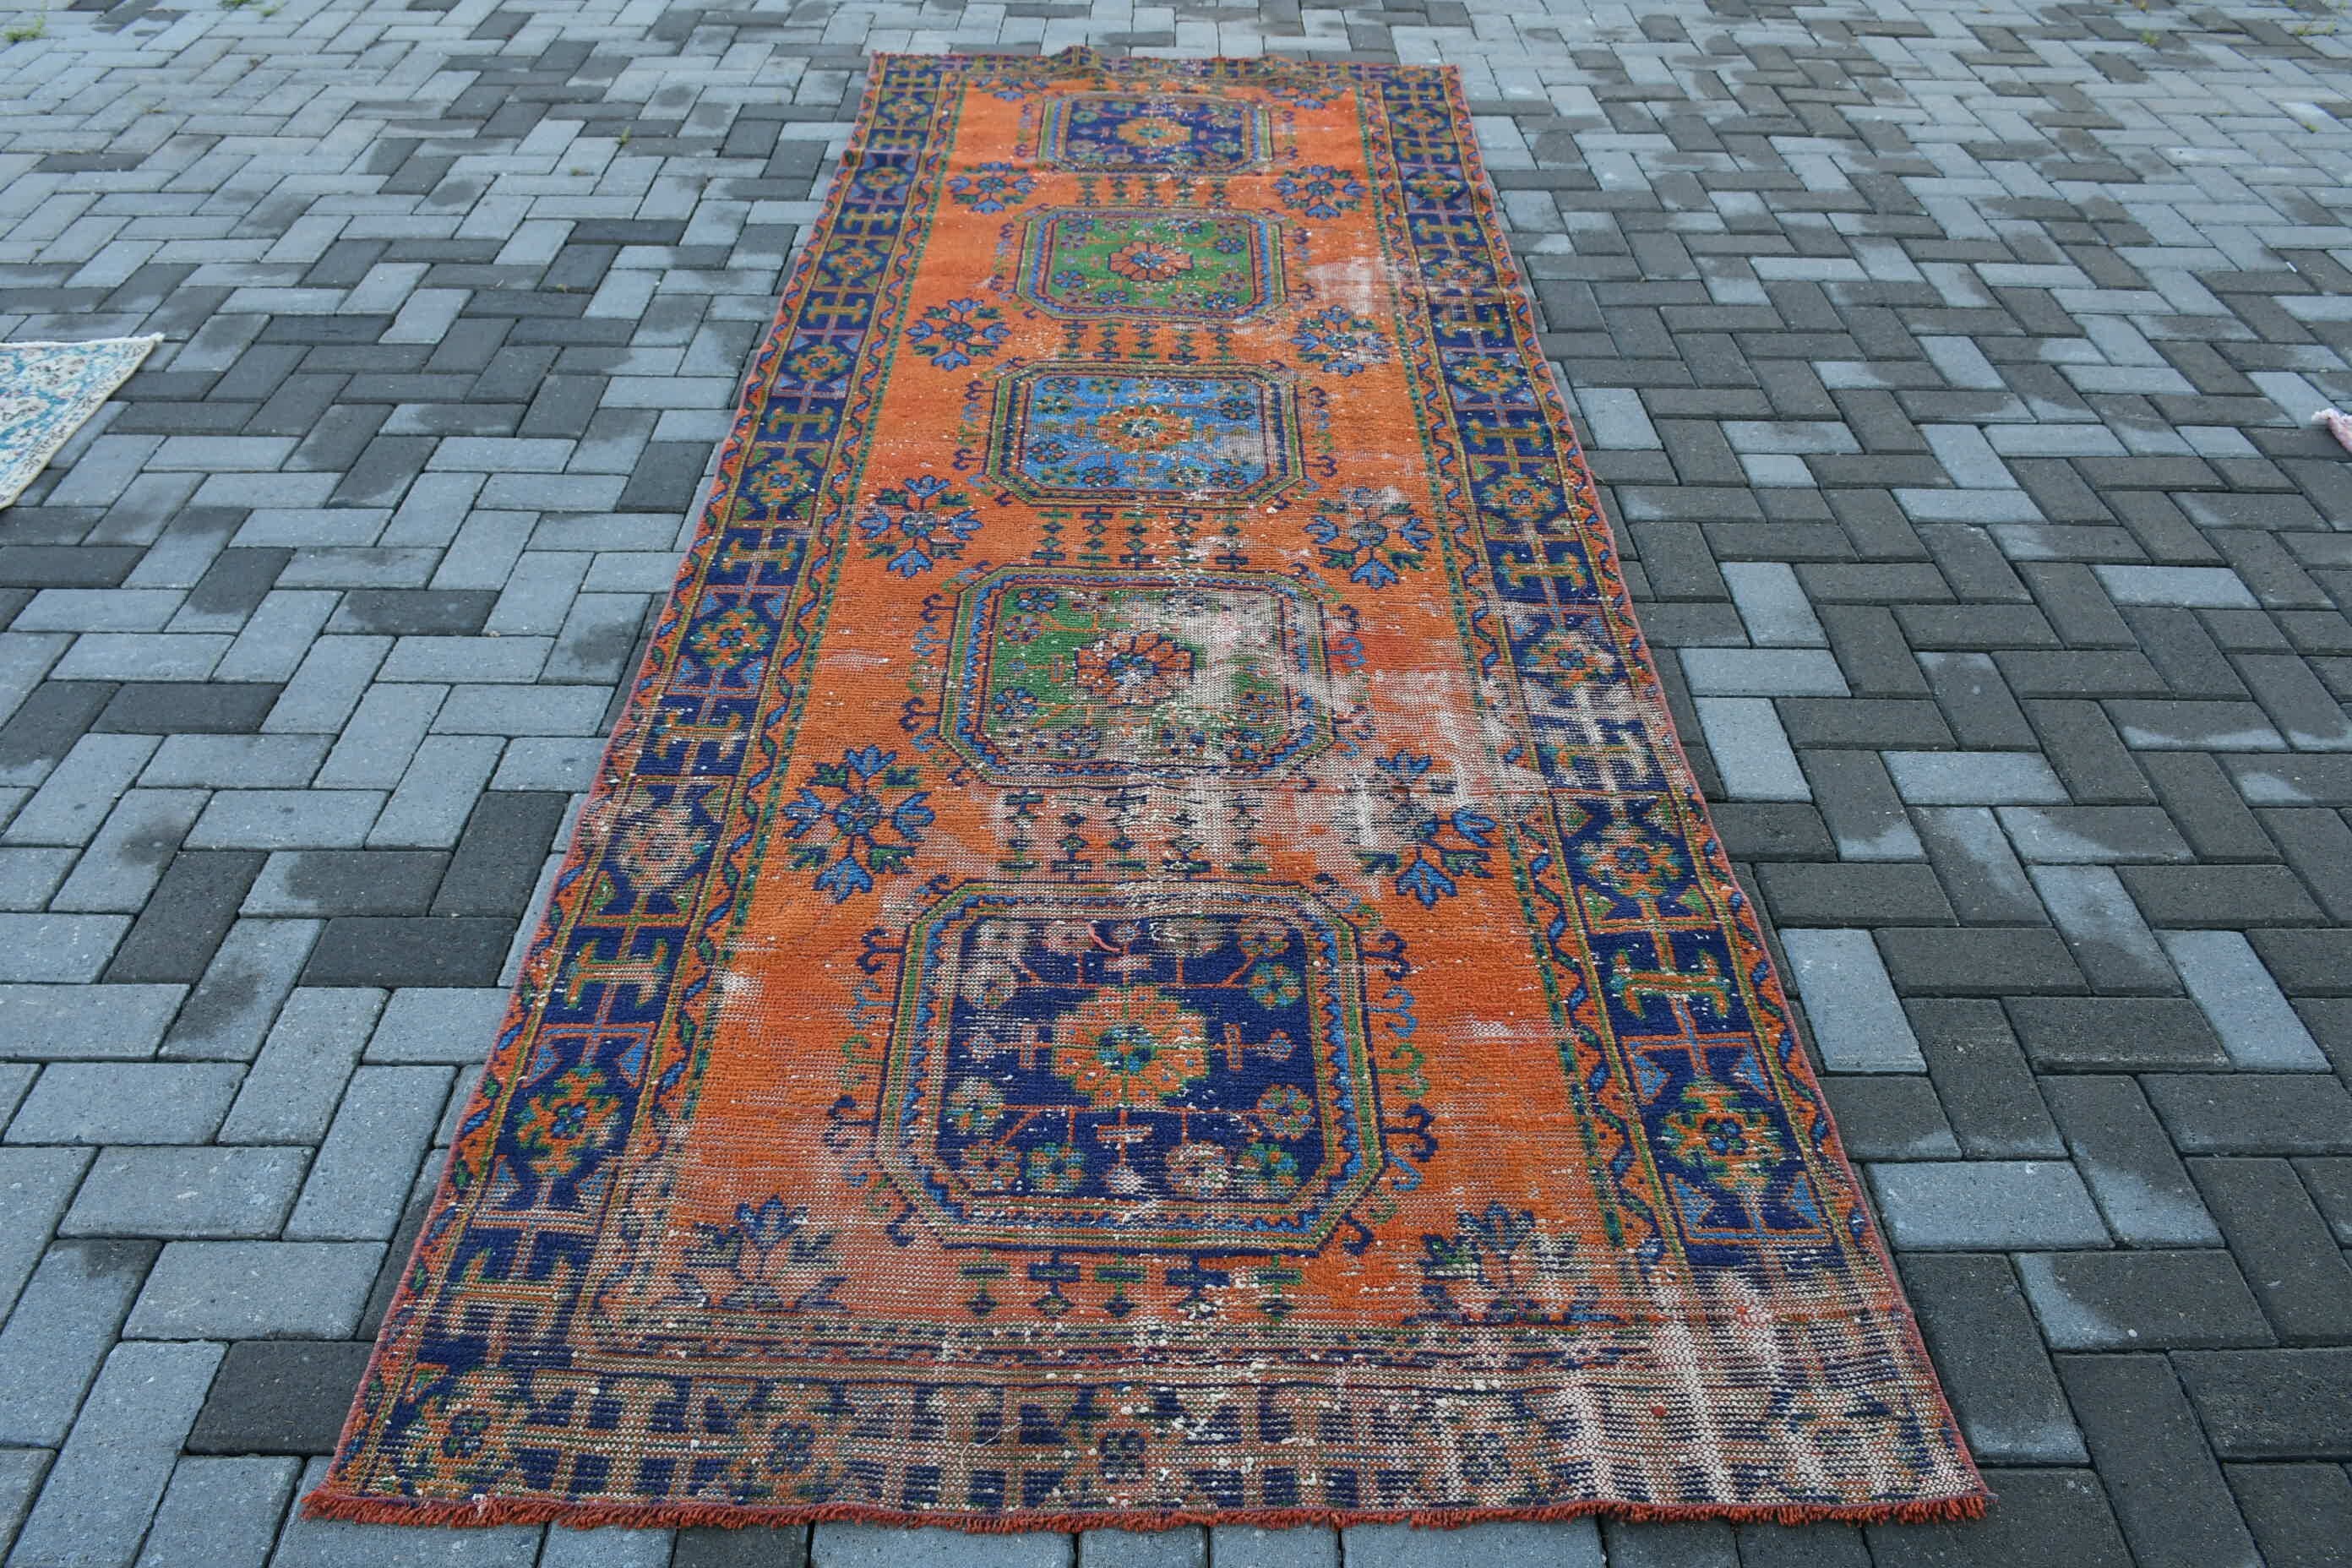 Turkish Rugs, Vintage Rug, Rugs for Stair, Kitchen Rug, Home Decor Rug, Stair Rugs, 4.1x11 ft Runner Rug, Blue Antique Rug